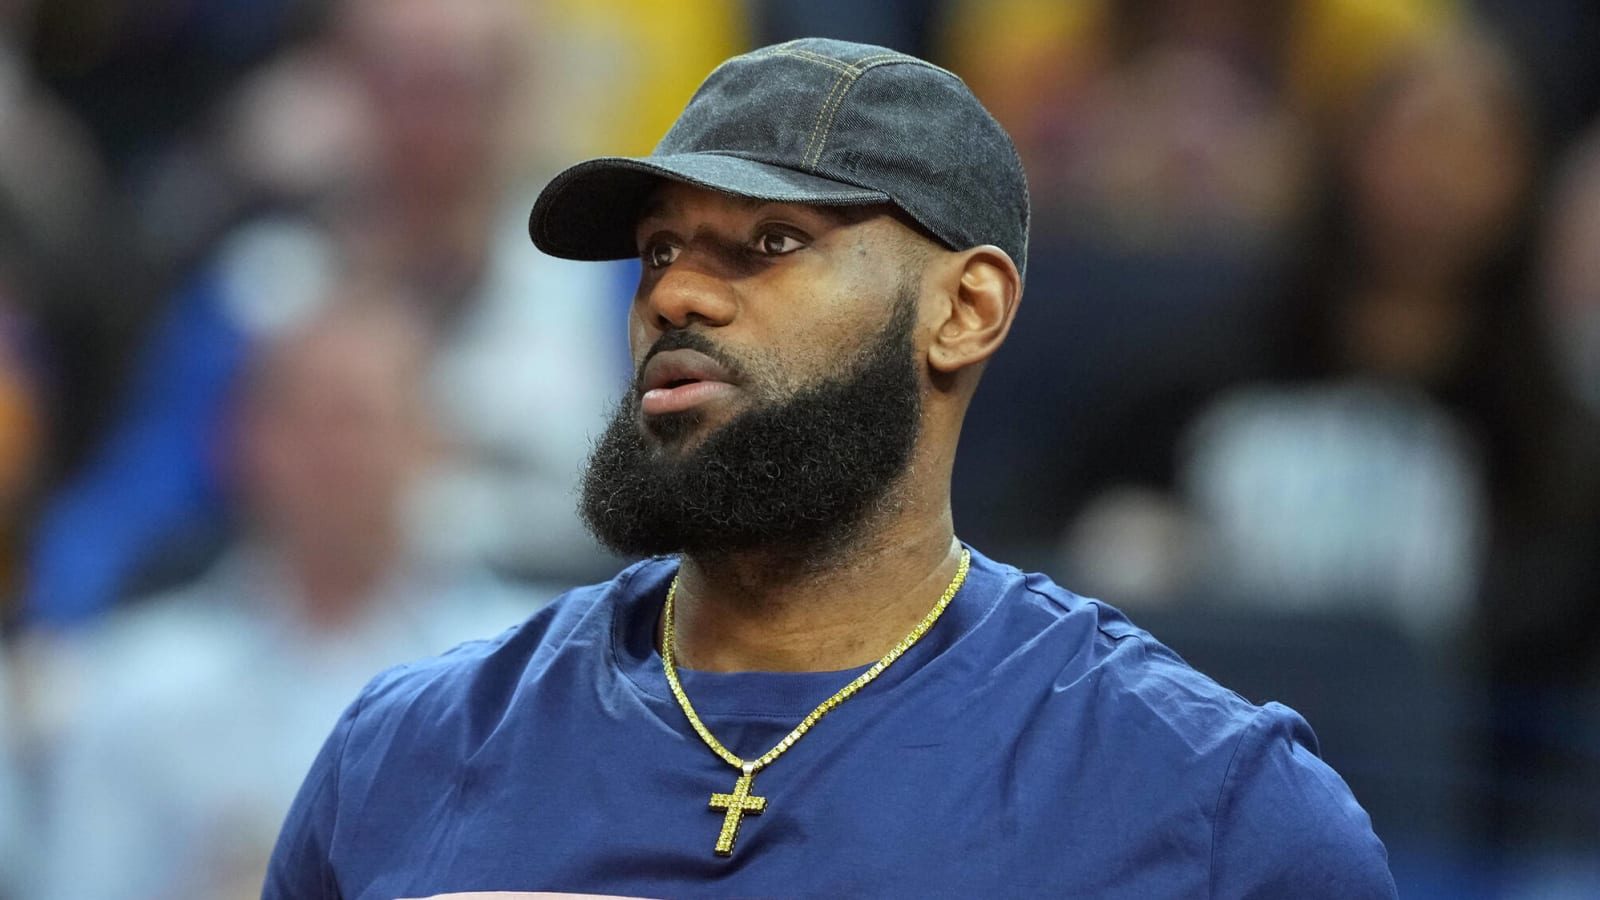 LeBron reveals which playoff team he'd want to join